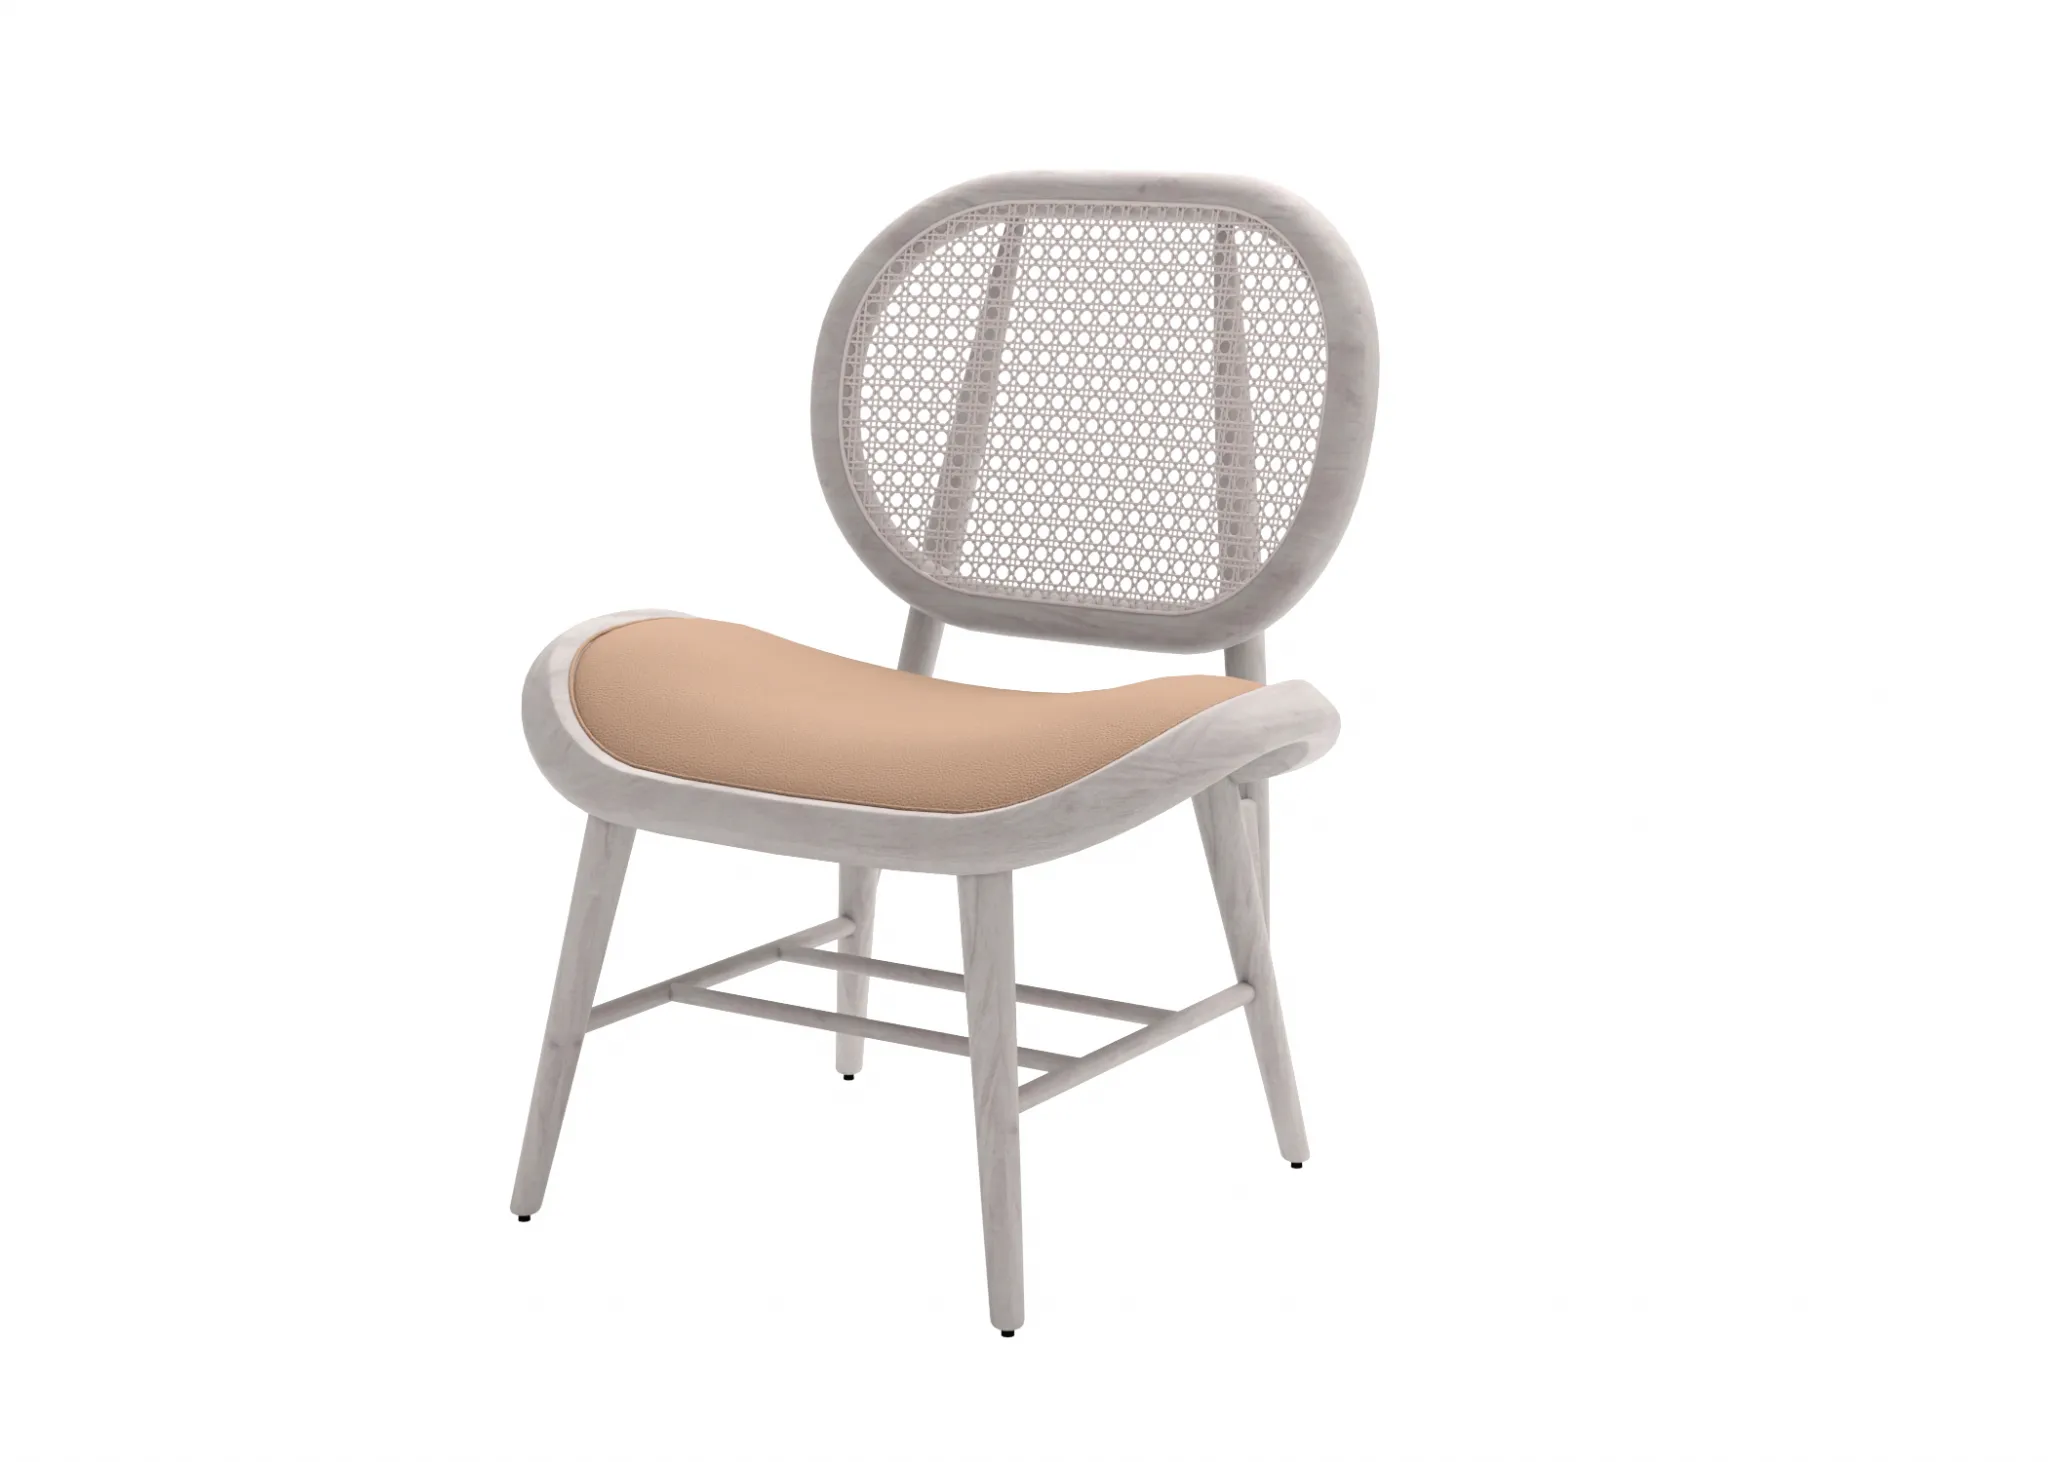 FURNITURE 3D MODELS – CHAIRS – 0411